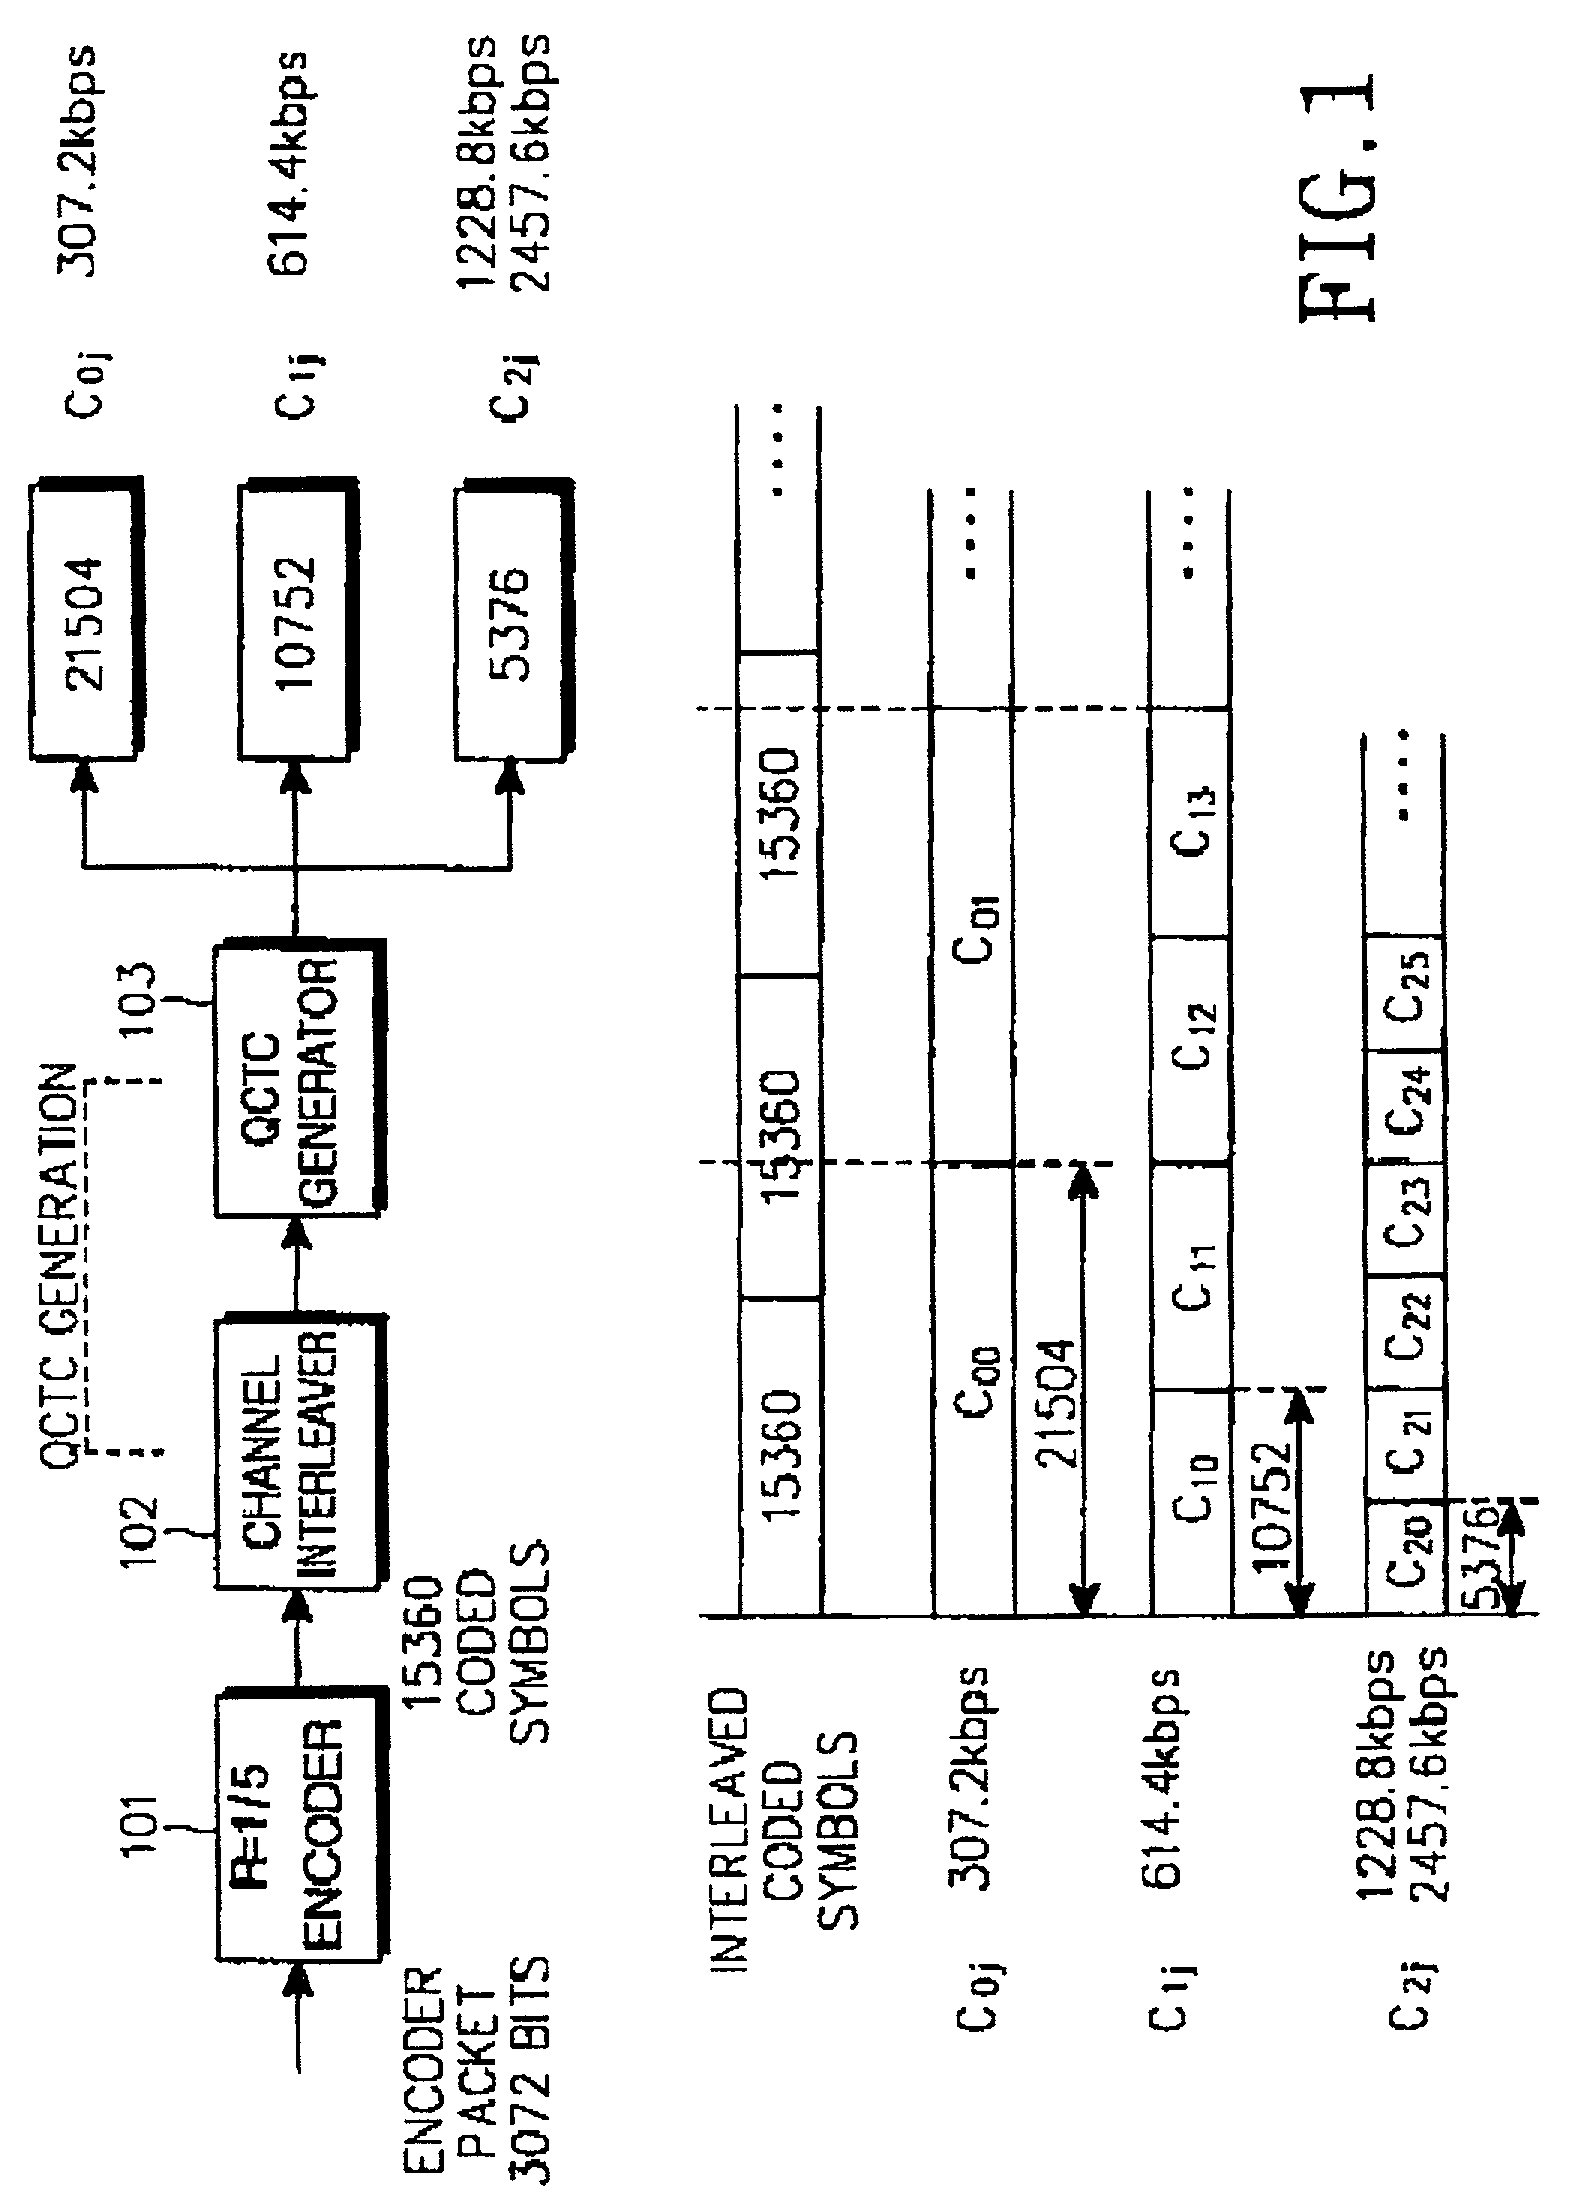 Apparatus and method for generating and decoding codes in a communication system